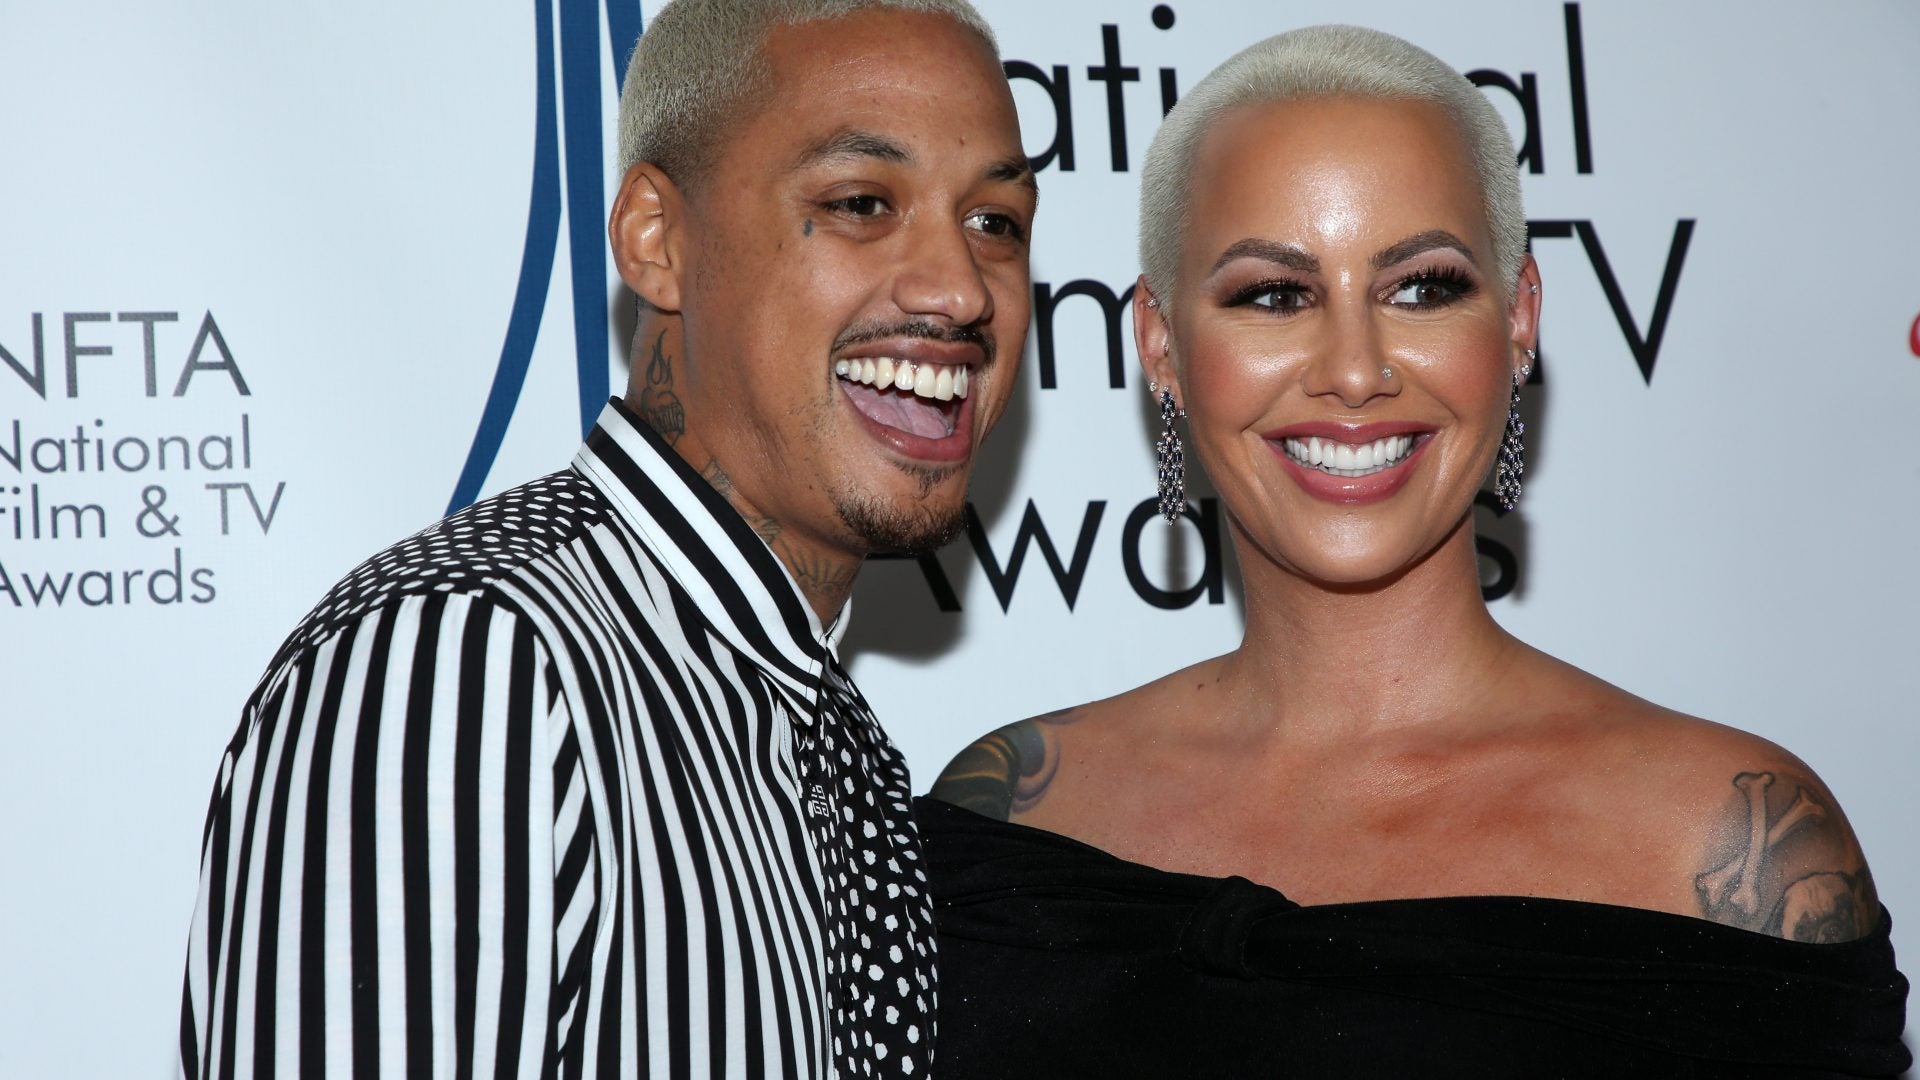 Amber Rose Cuts Off Boyfriend, Mother In Emotional Message: "I Refuse To Let Anyone Damage Me Anymore"